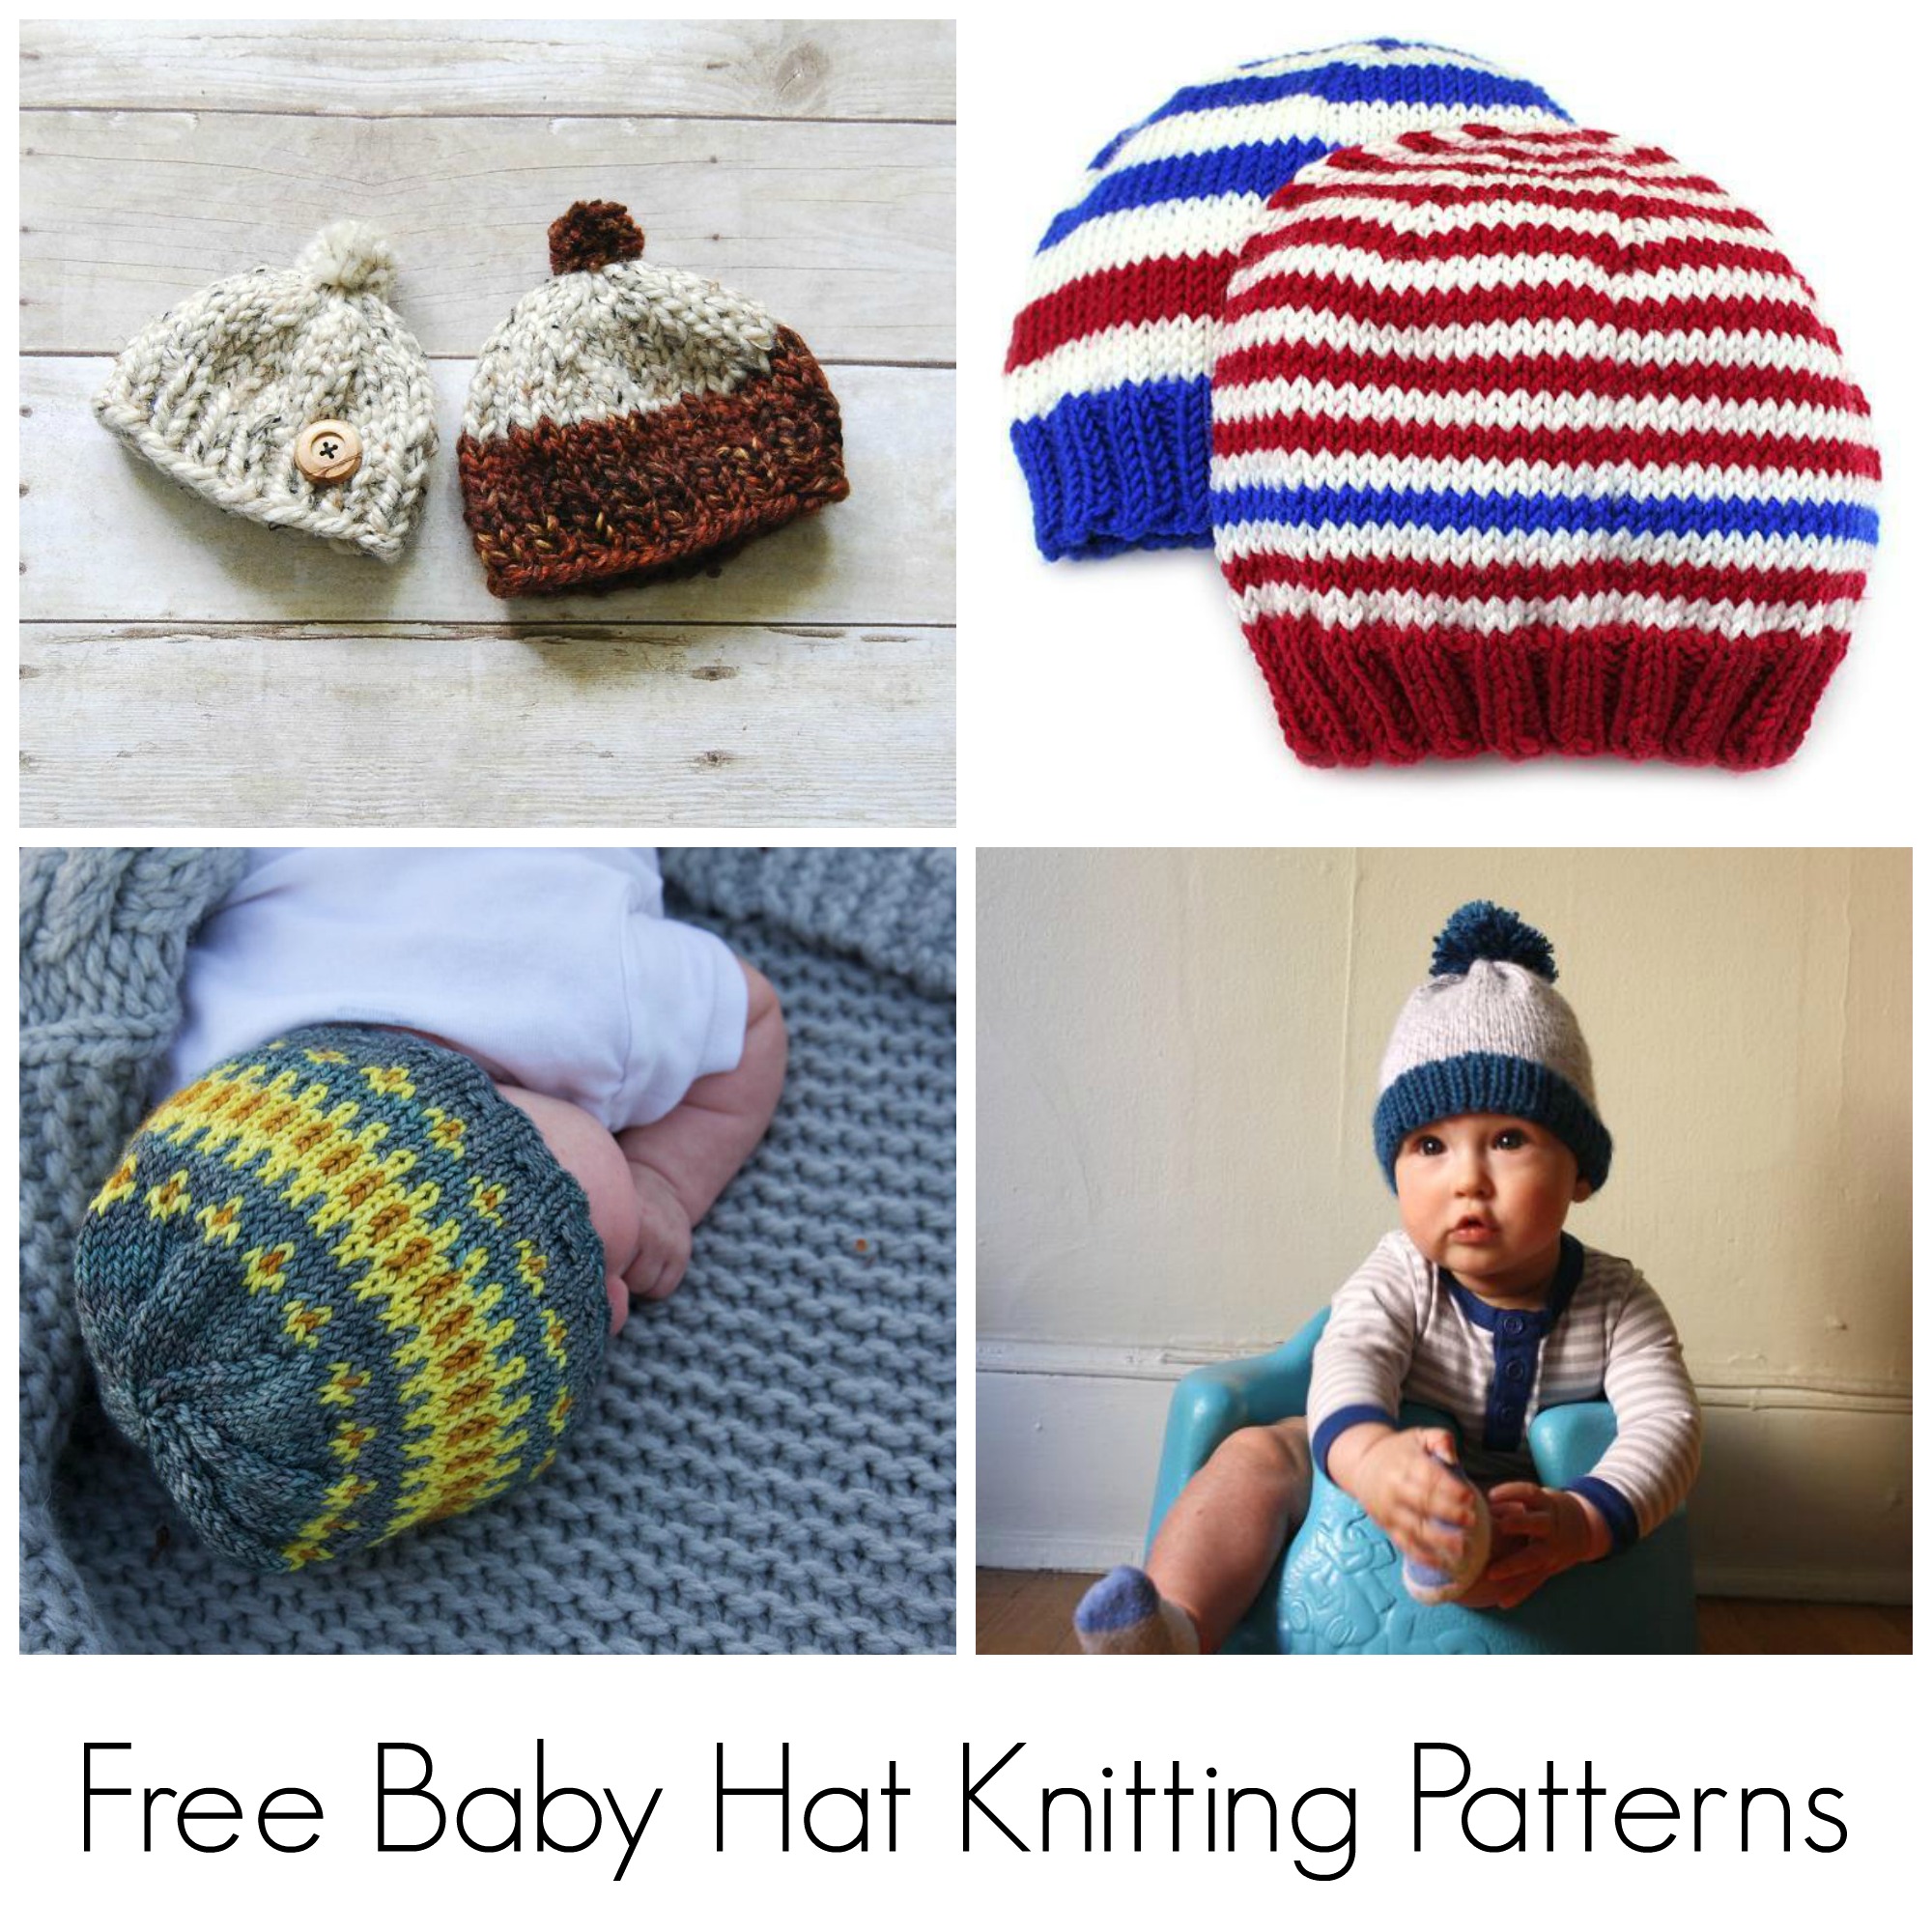 10 FREE Knitting Patterns for Baby Hats on Bluprint